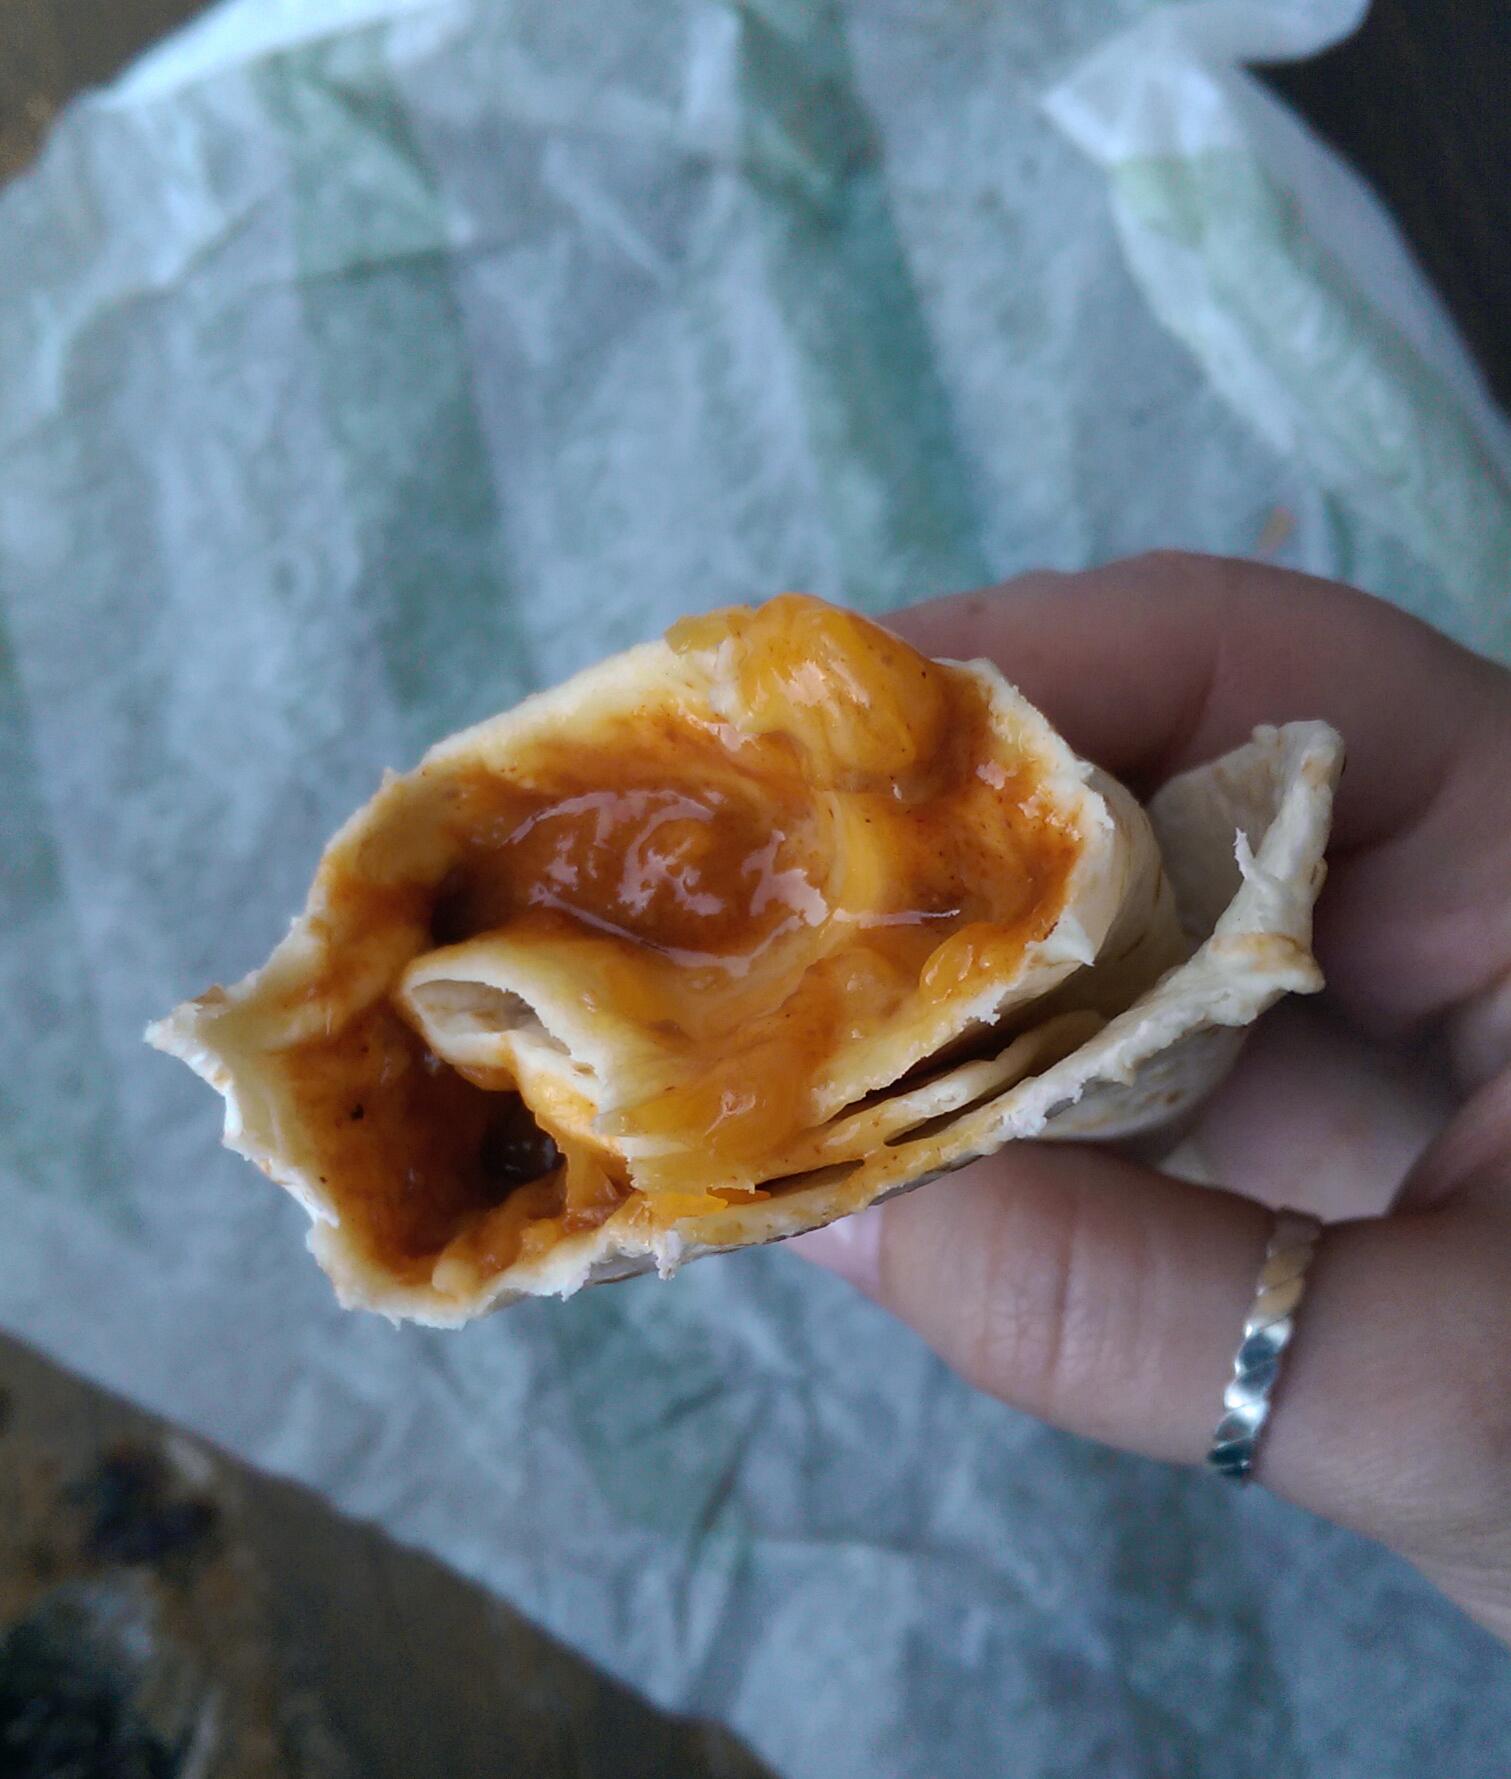 Taco Bueno On Twitter I Know What I M Having For Tbtbt Our Newest Throwback The Chili Cheese Wrap Http T Co 9ormbhpolf